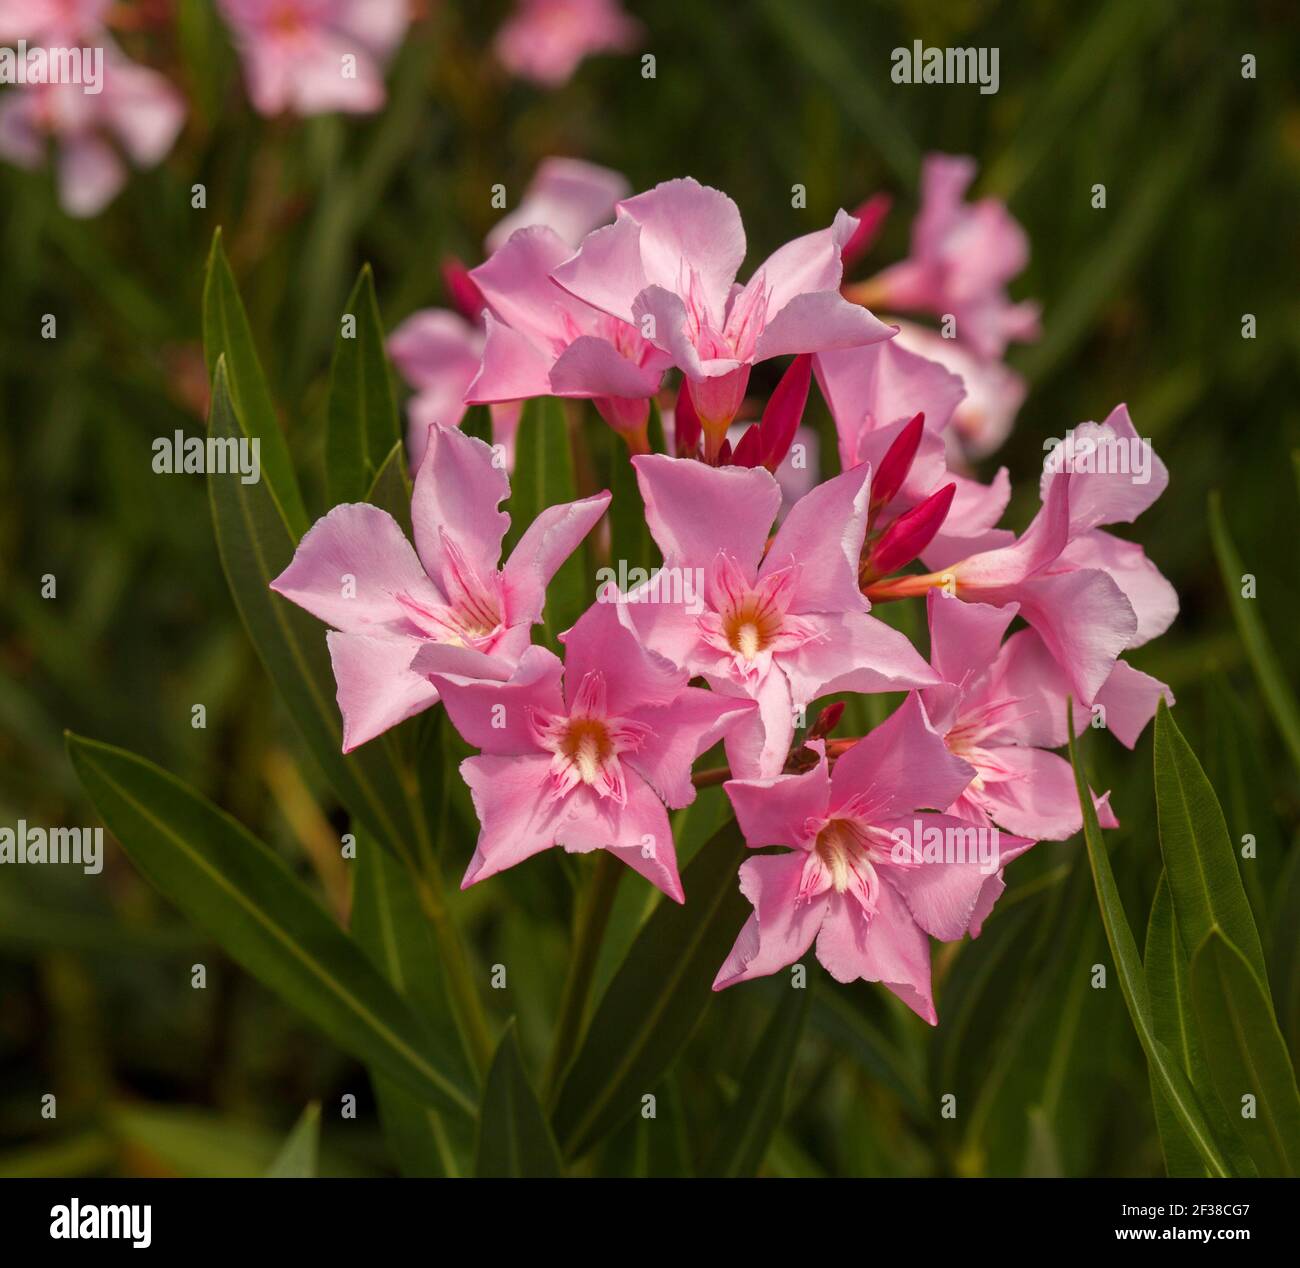 Cluster of beautiful pink flowers of evergreen shrub, Nerium oleander, poisonous plant, on background of dark green leaves Stock Photo